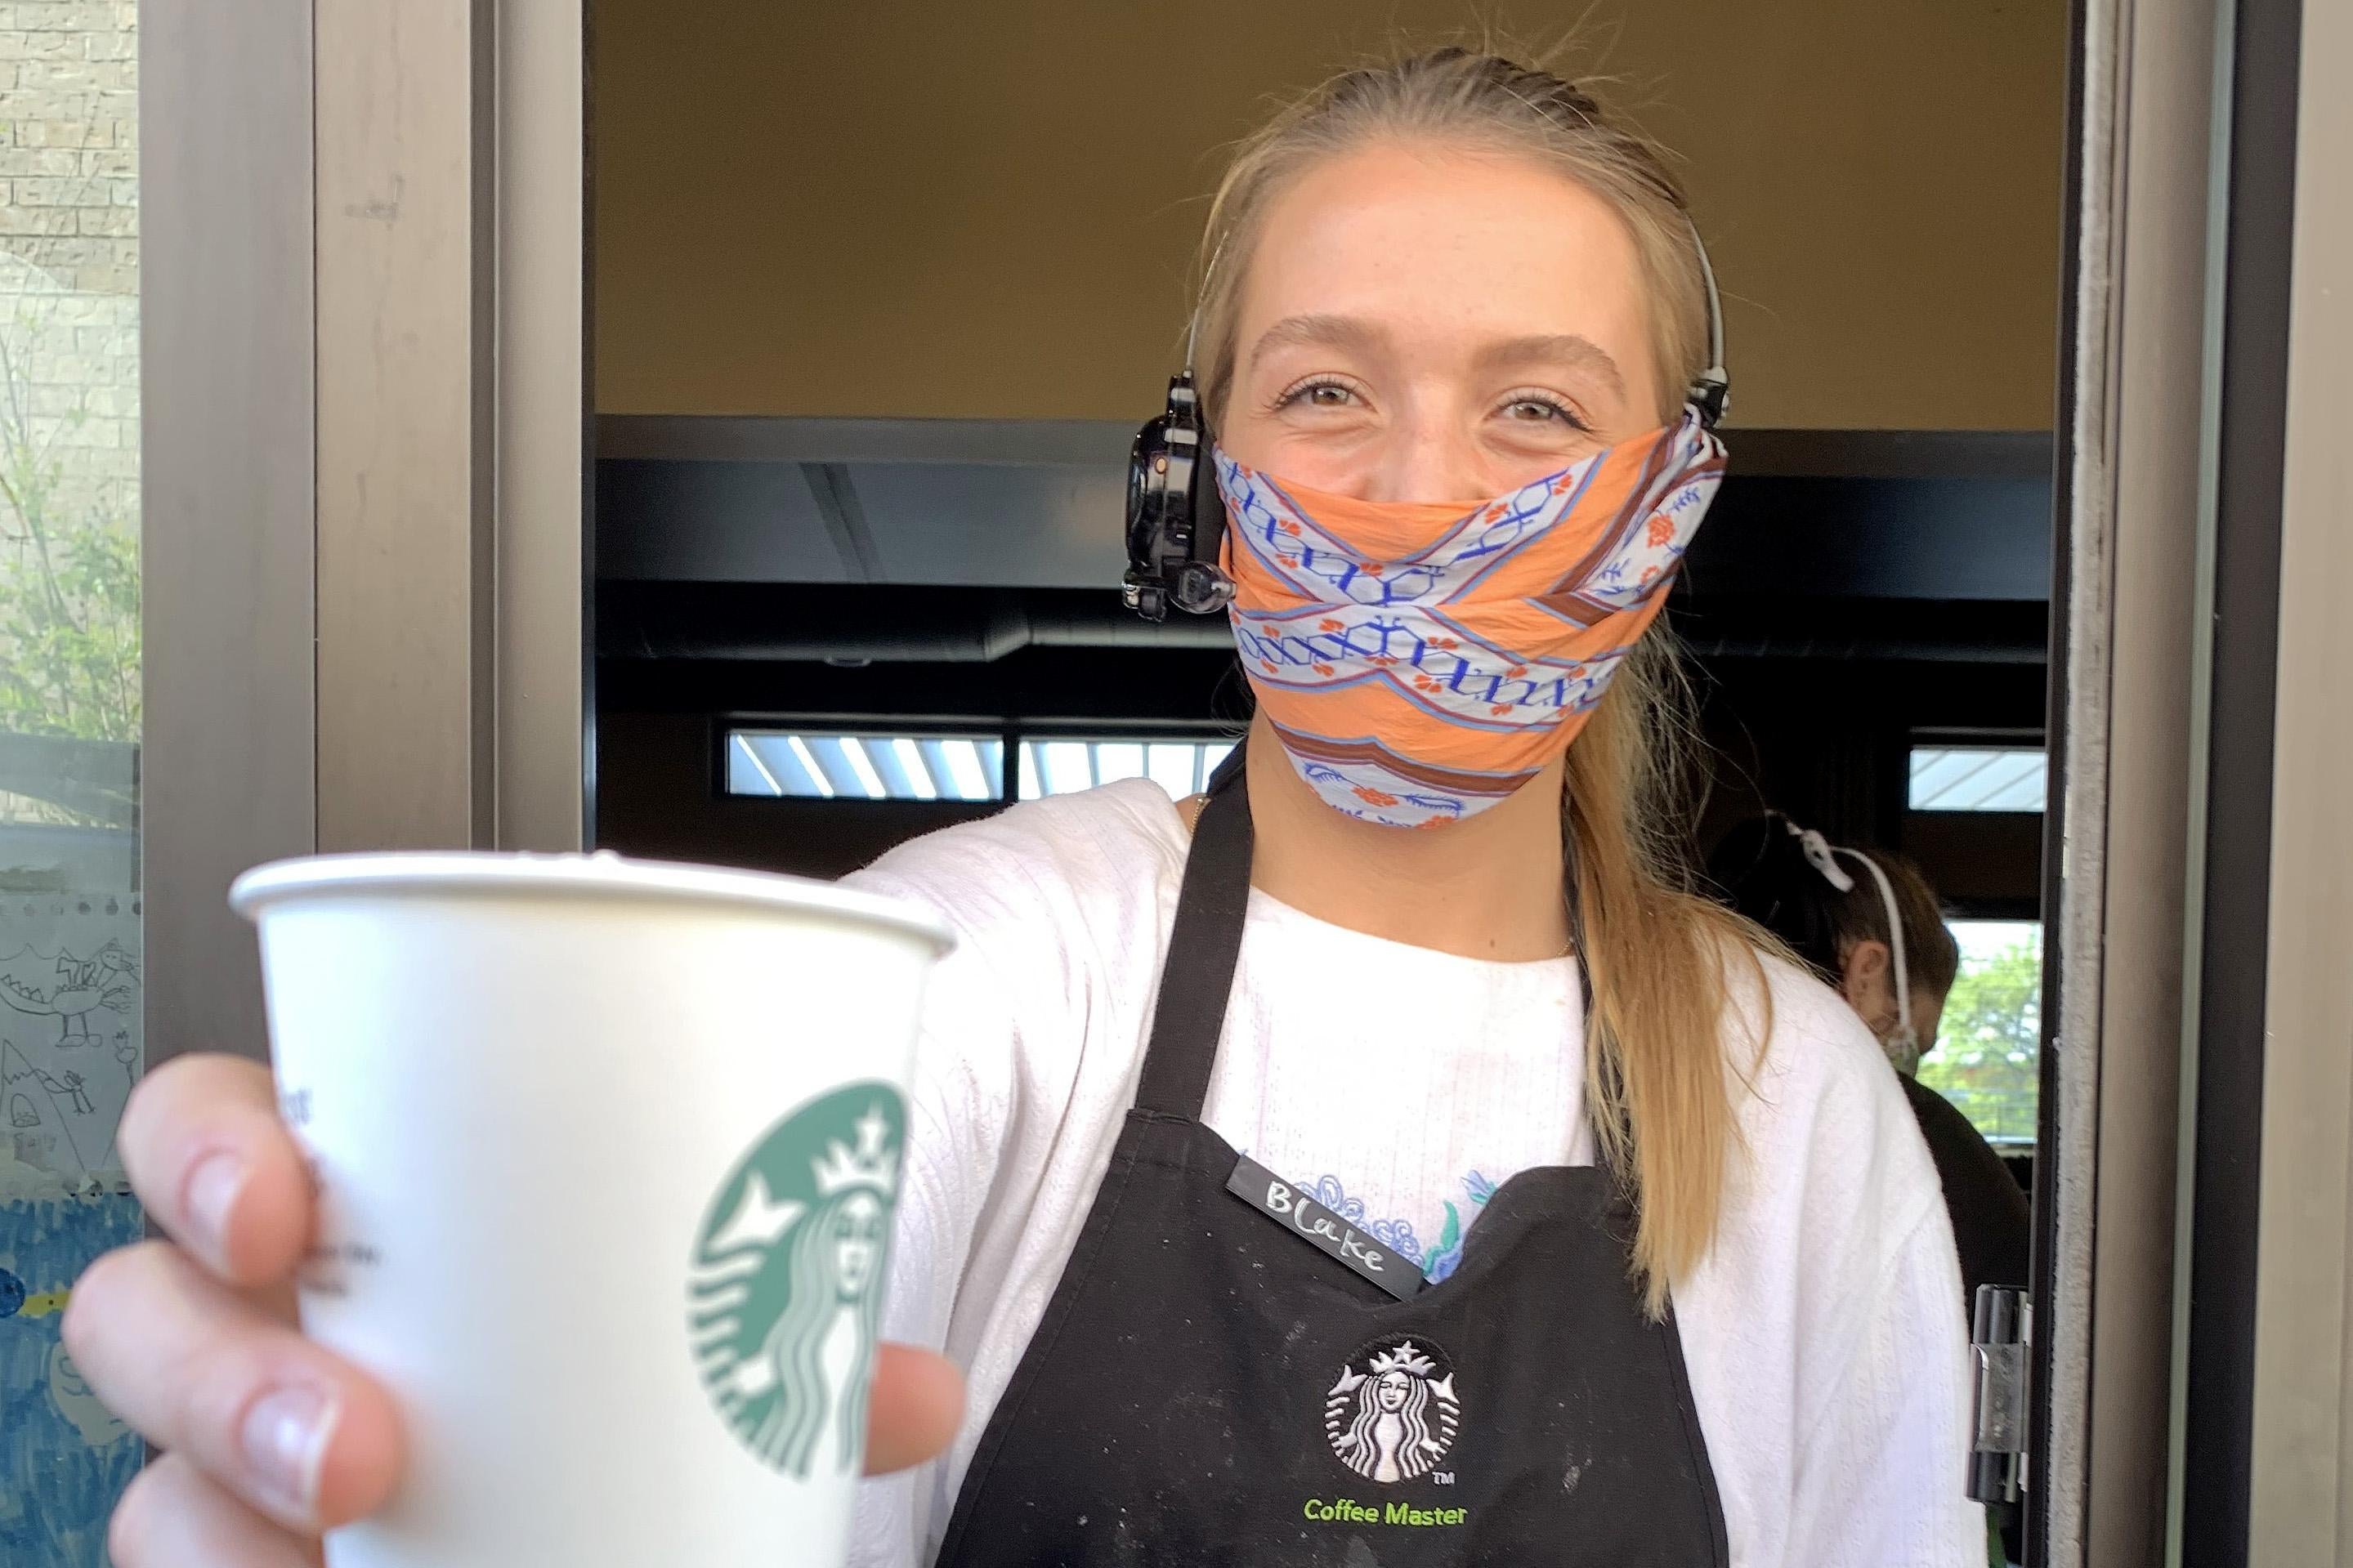 A Starbucks employee wears a facial covering while working the drive-thru during the coronavirus (COVID-19) pandemic on April 07, 2020 in Dallas, Texas.  Starbucks is requiring employees to wear a facial covering and is making thermometers available to employees who would like to take their temperature before starting a shift. 